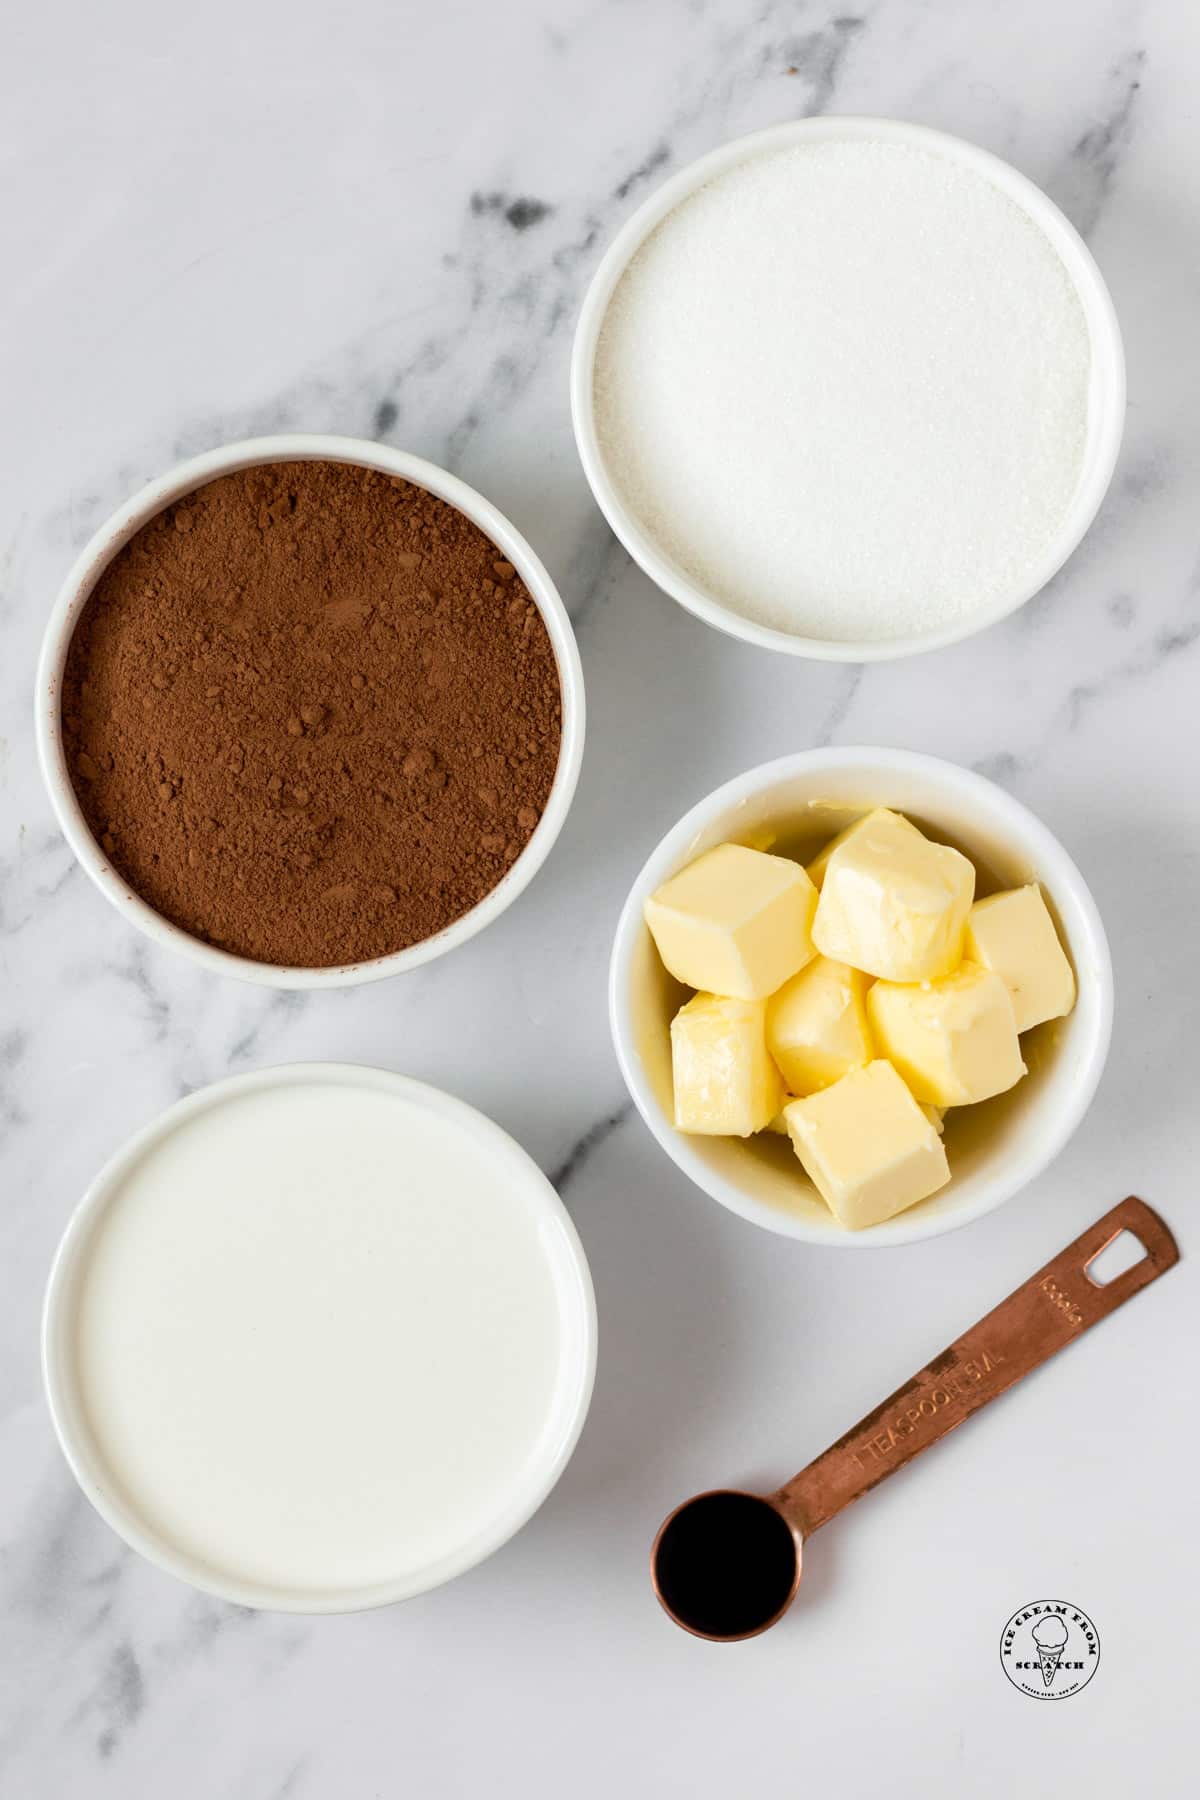 The ingredients in homemade hot fudge sauce, on a marble counter, viewed from overhead